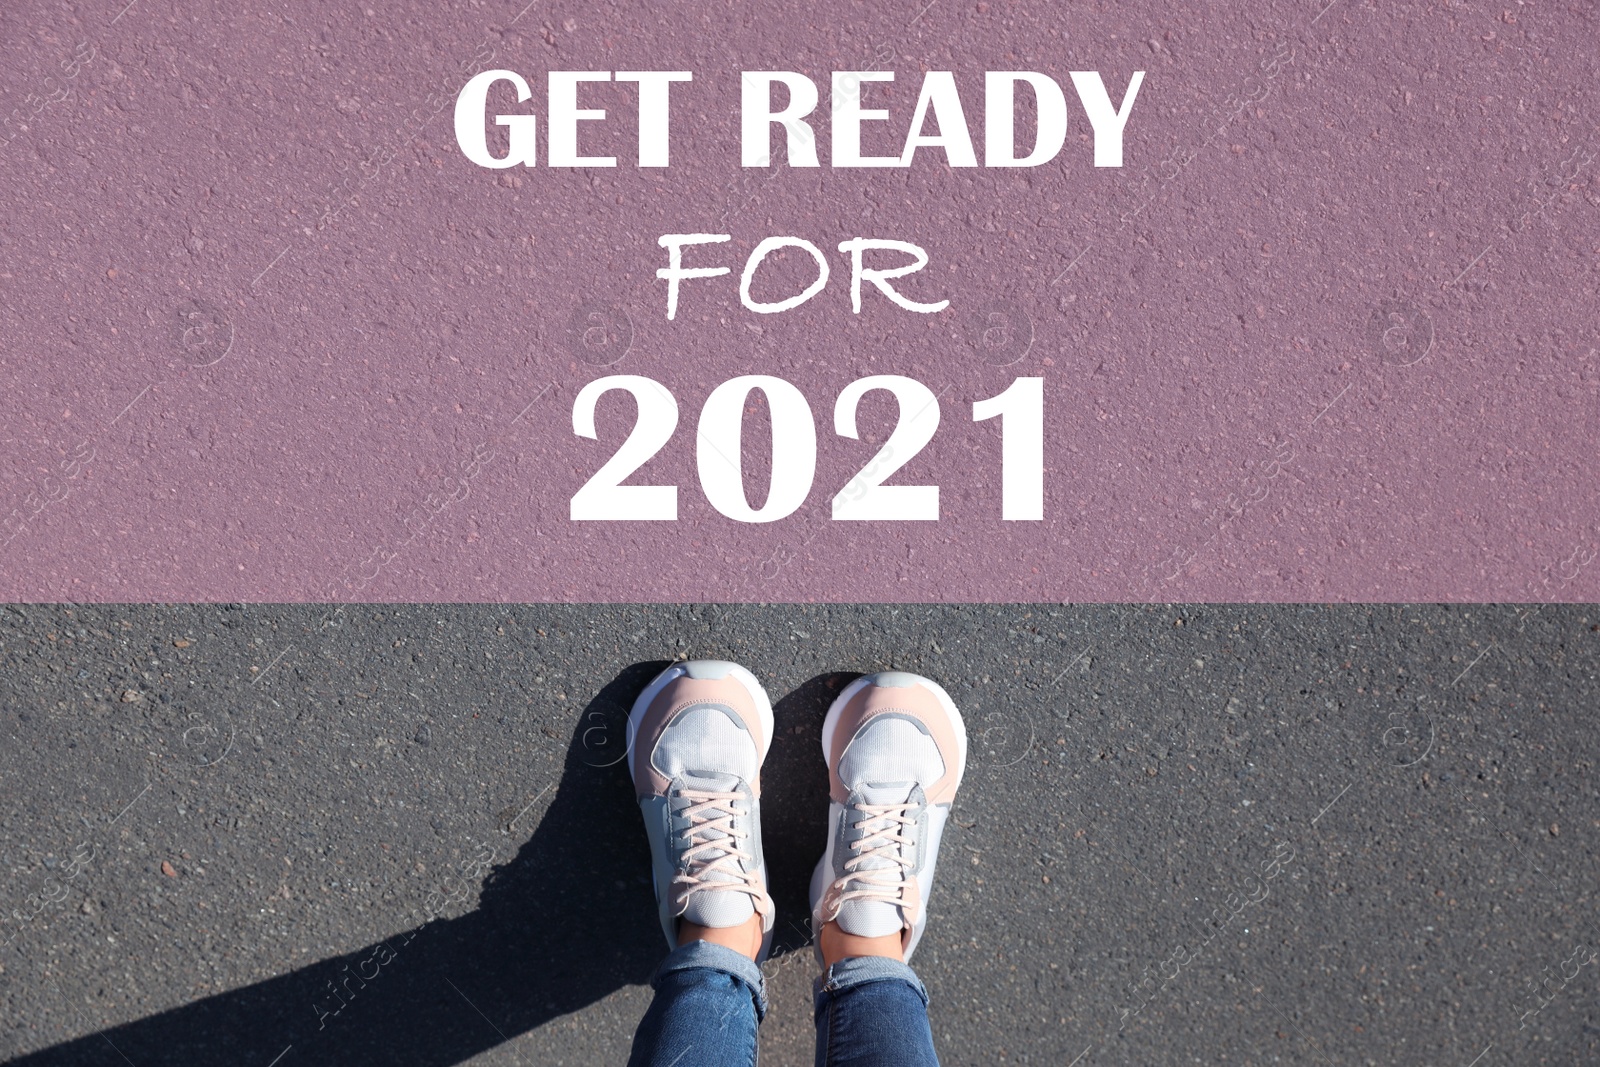 Image of Text Get Ready For 2021 on asphalt in front of woman, top view